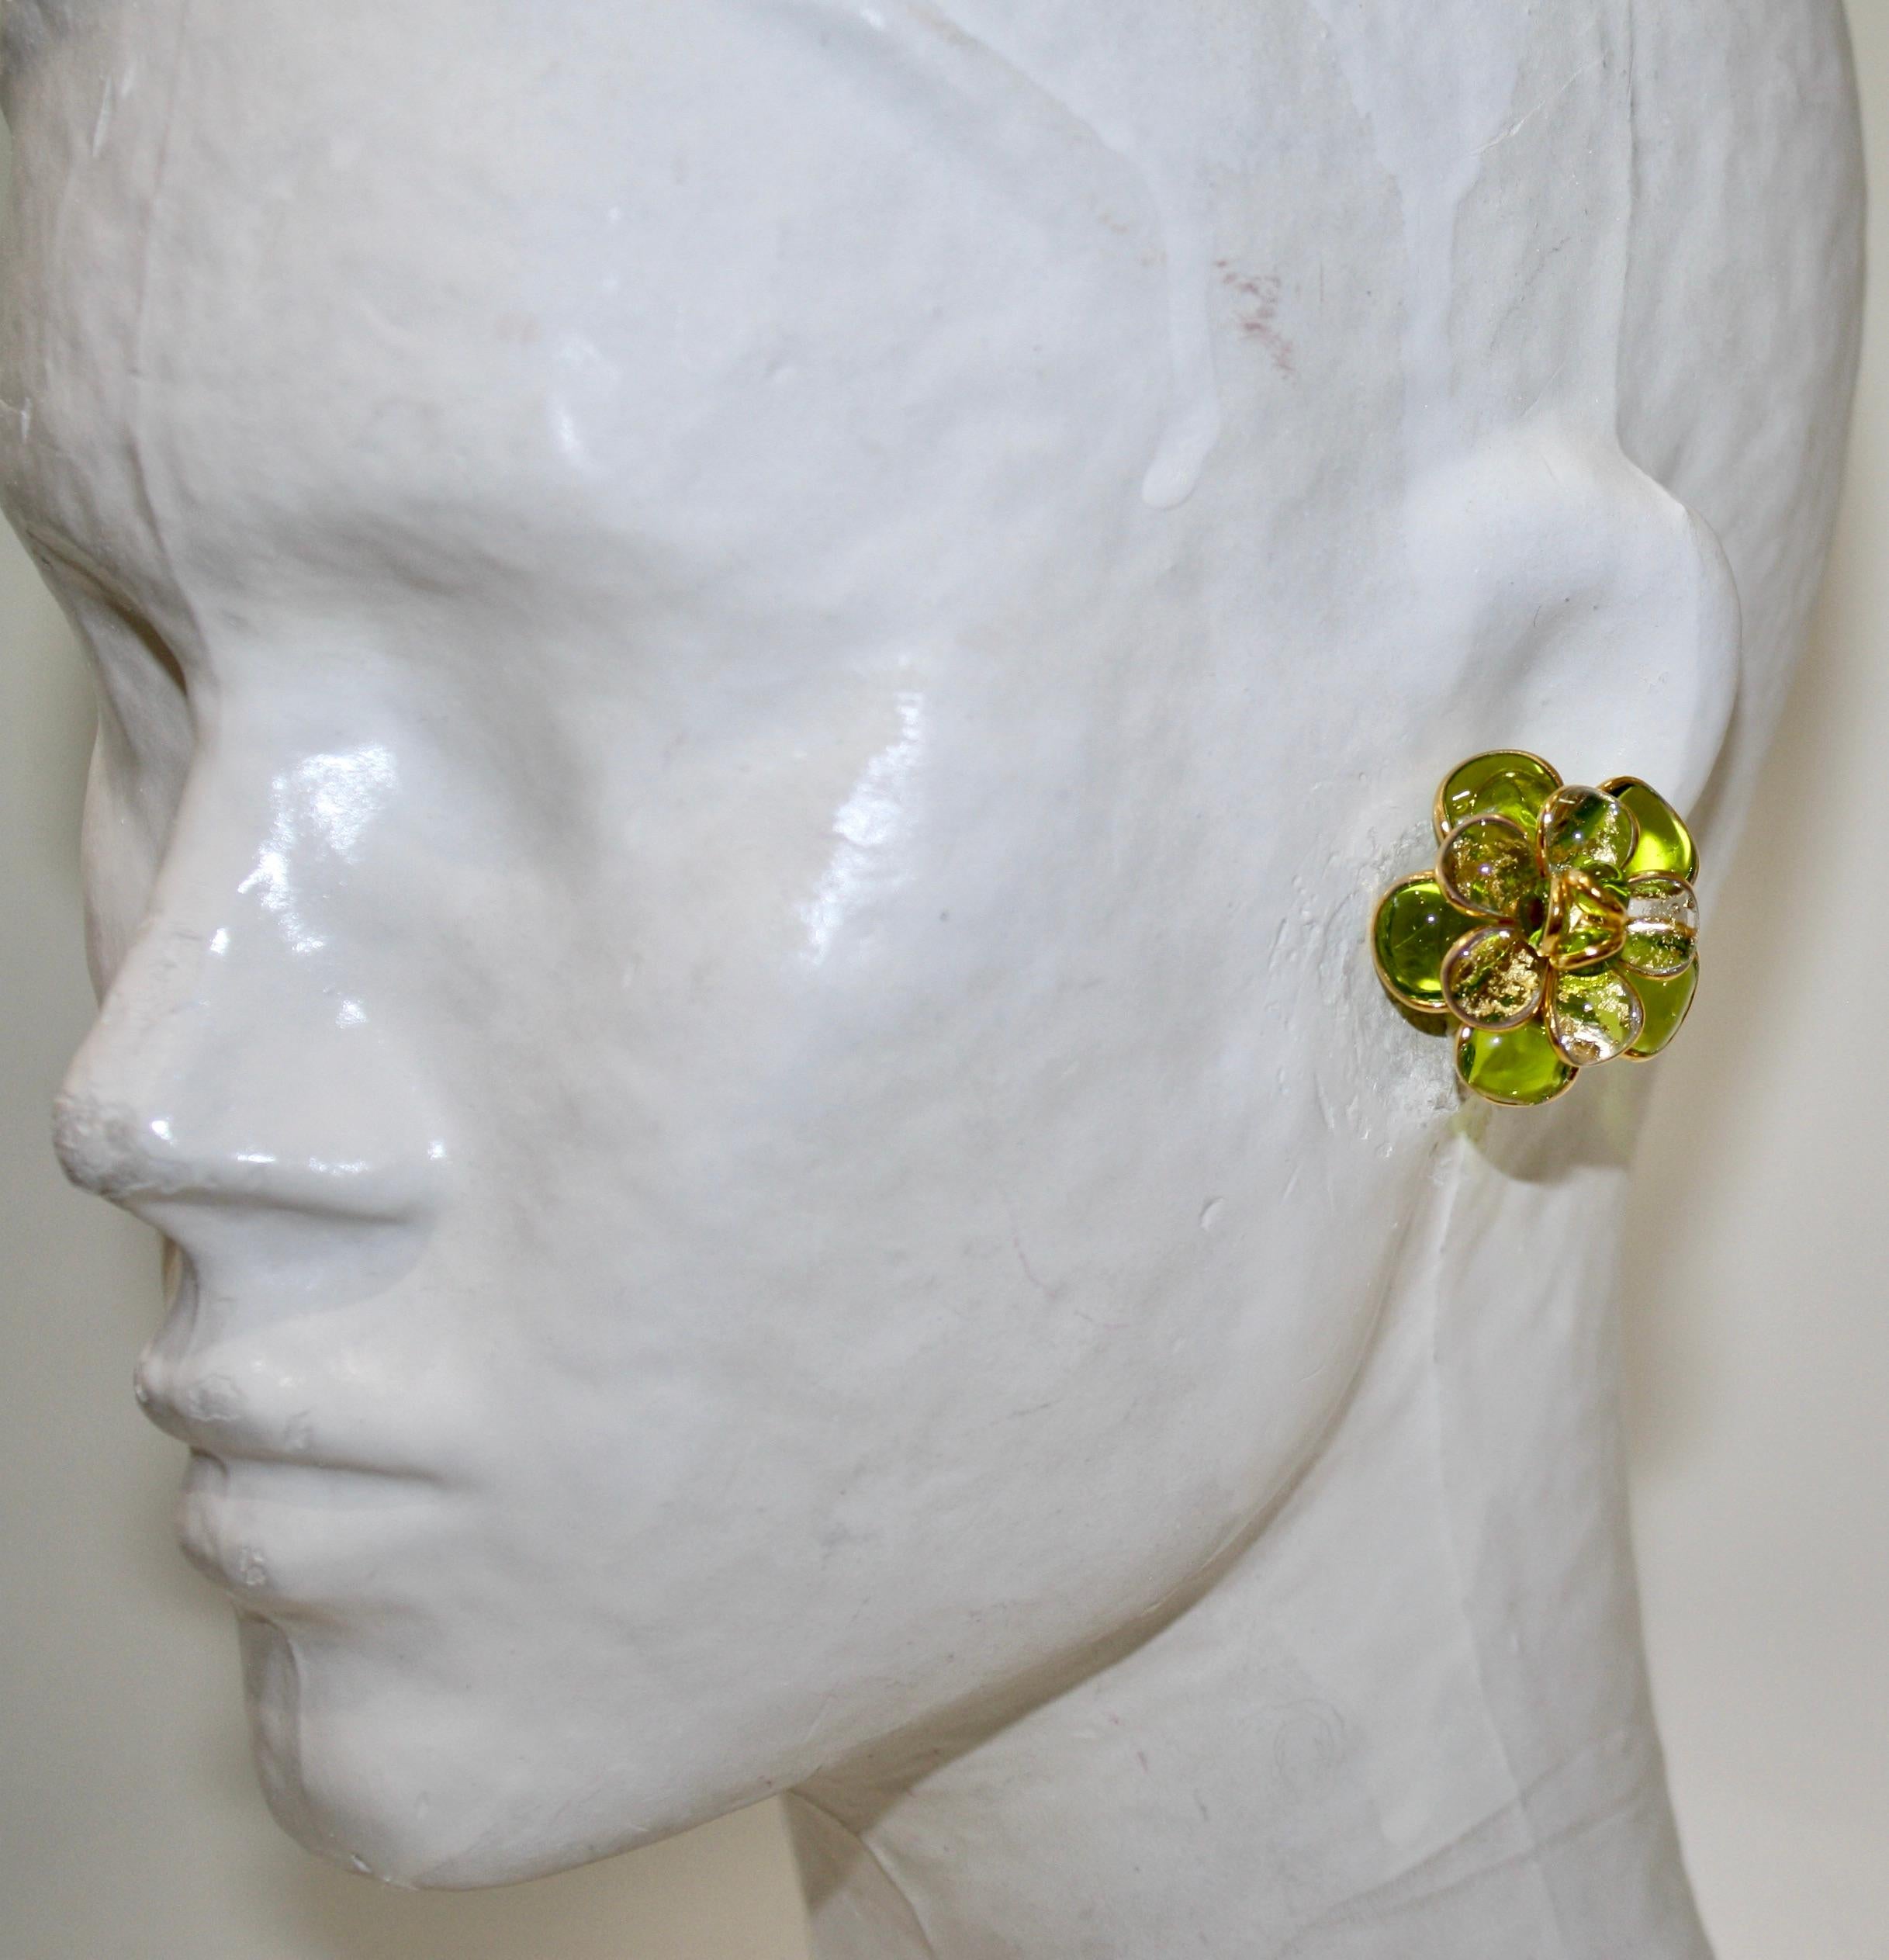 Designed by the former artisans of the atelier of Gripoix, made in the special process of pate de verre or poured glass. Gold leaves are inserted in the glass. 18-carat gilded brass. Clip earrings